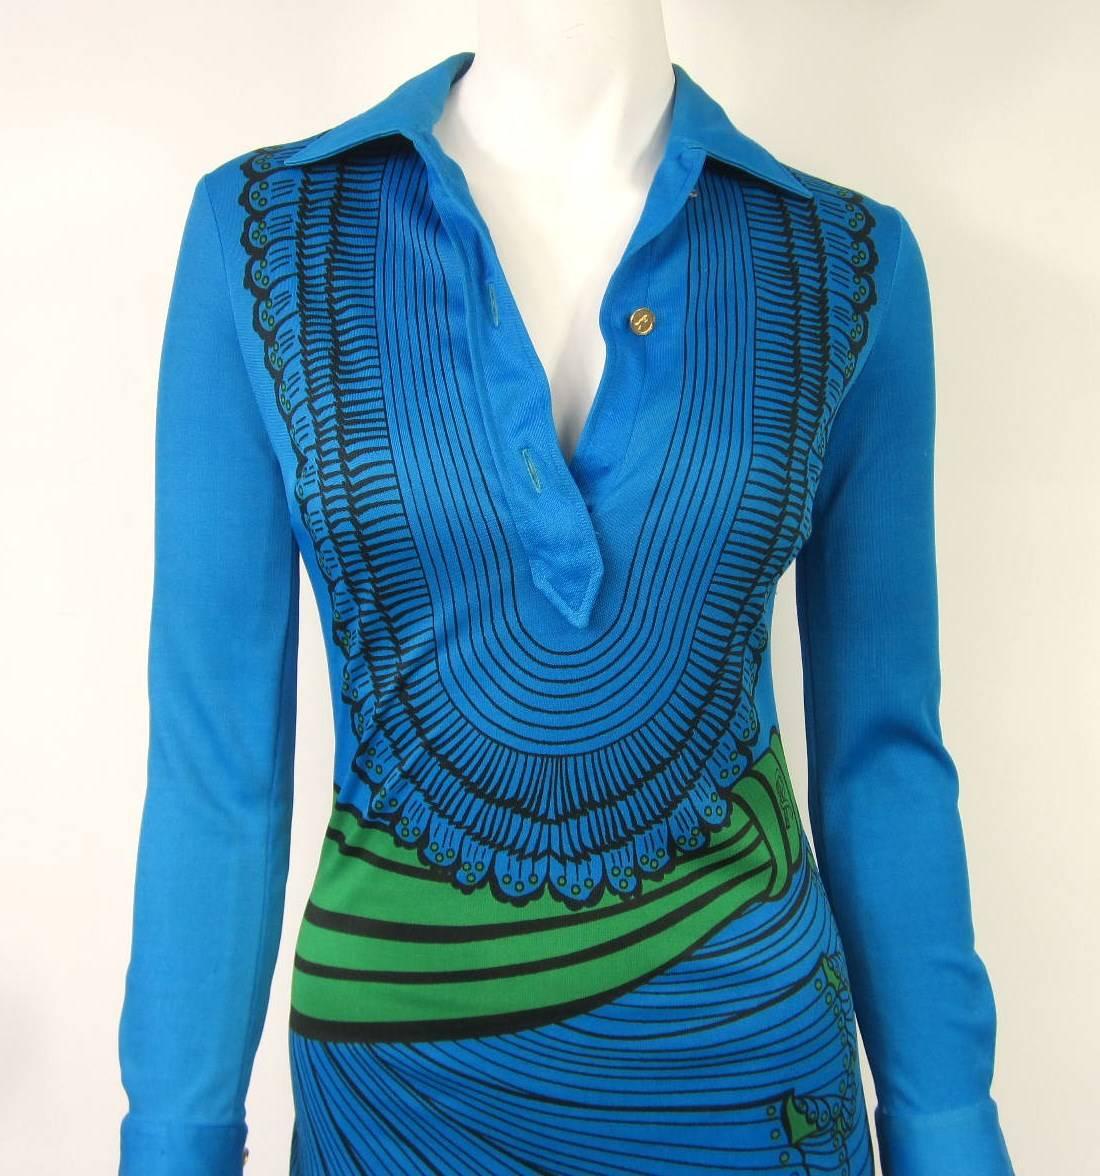 Graphic Electric Blue with a shot of vibrant green with black is stunning on this 1970s ROBERTA DI CAMERINO Maxi Dress. Collar with 3 button closure. Buttoned cuffs. Tag not present but buttons and Dress itself are hallmarked with an R. Stunning